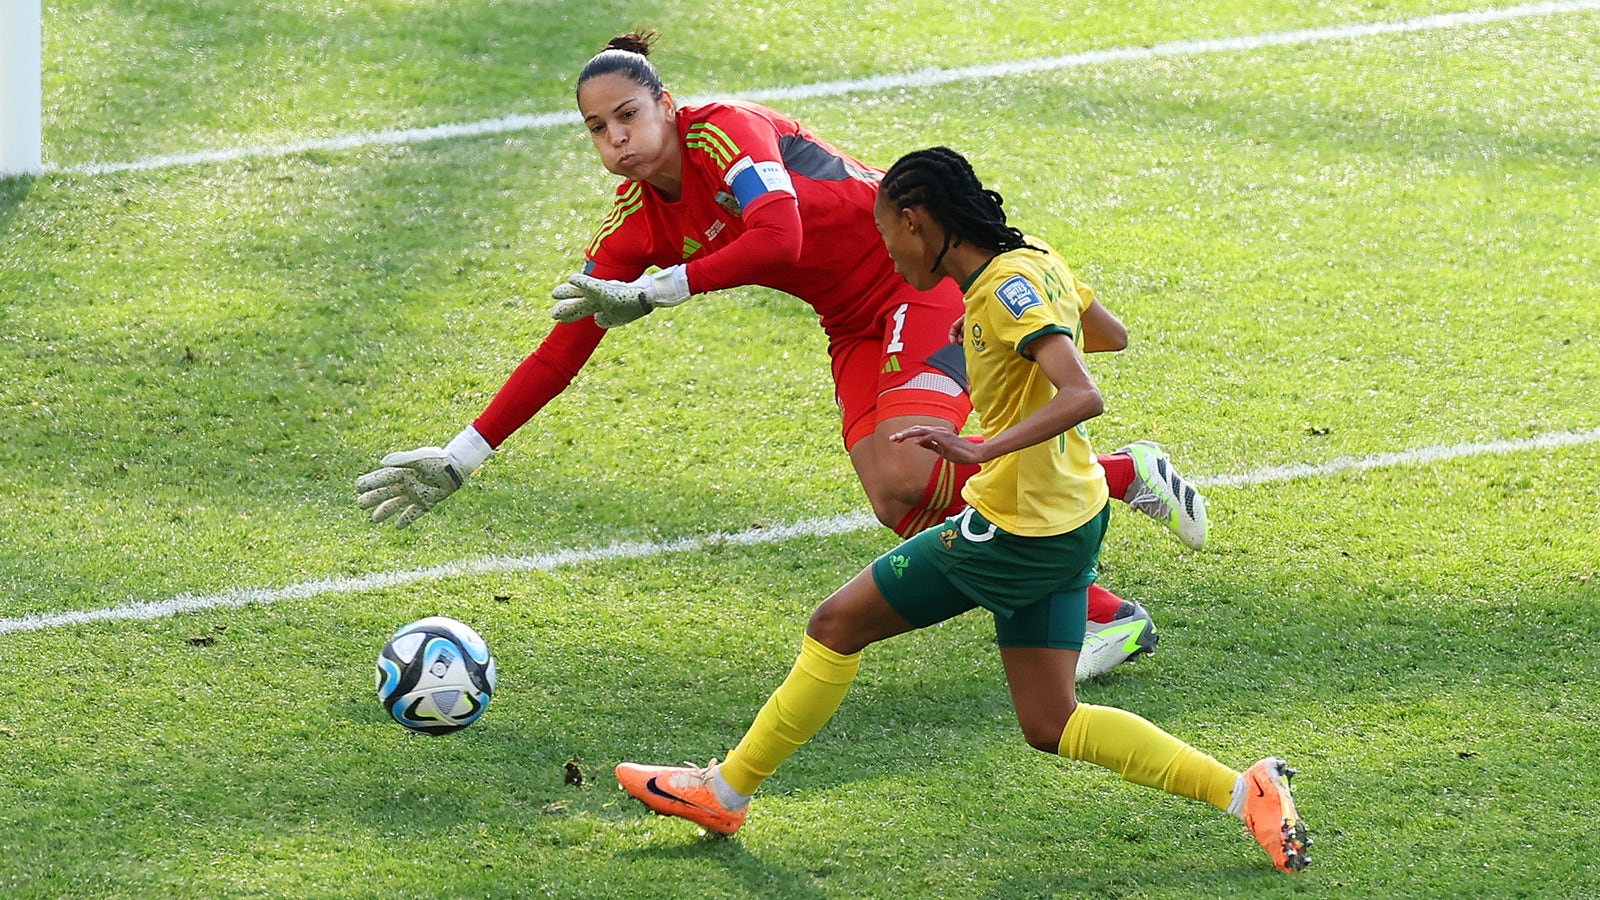 South Africa's Linda Motlhalo scores goal vs. Argentina in 30' | 2023 FIFA Women's World Cup